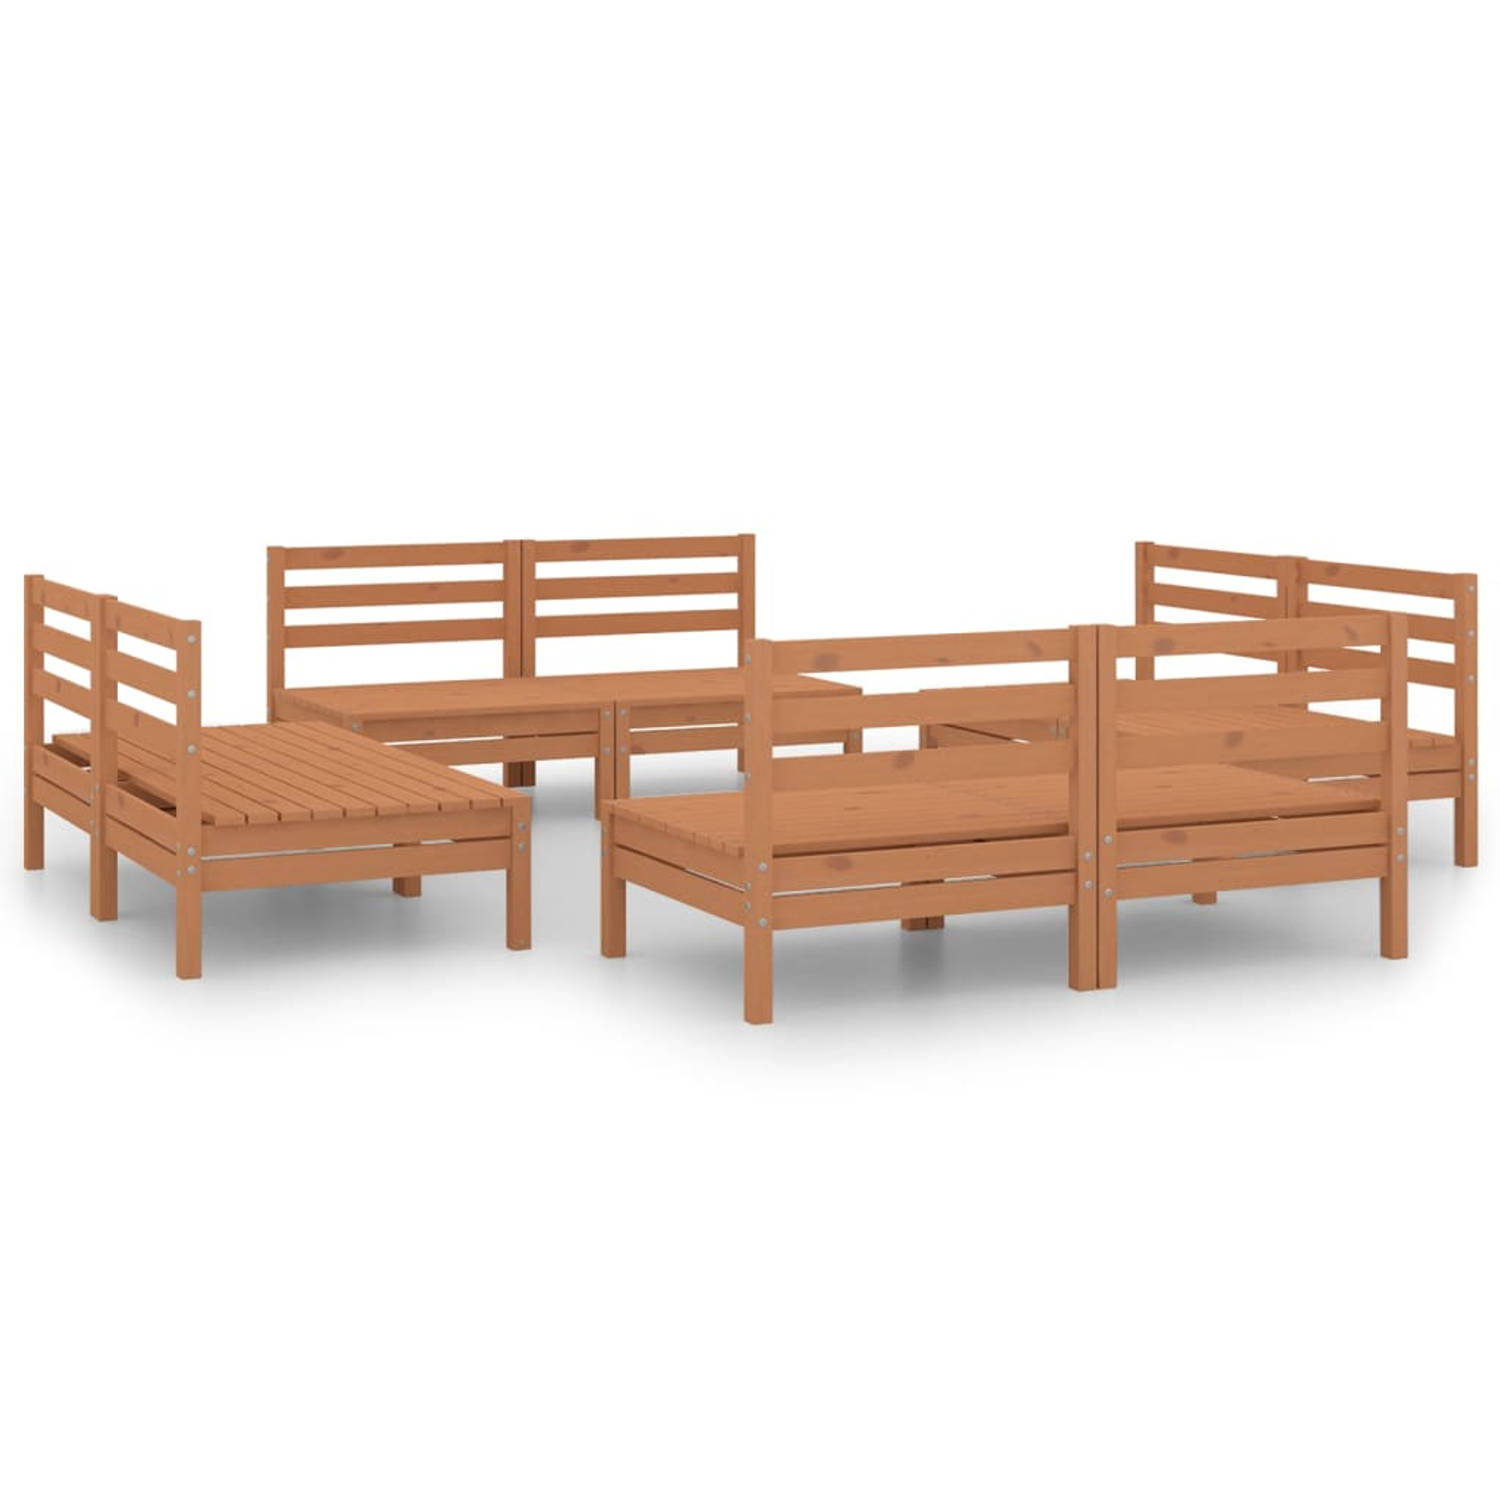 The Living Store 8-delige Loungeset massief grenenhout honingbruin - Tuinset